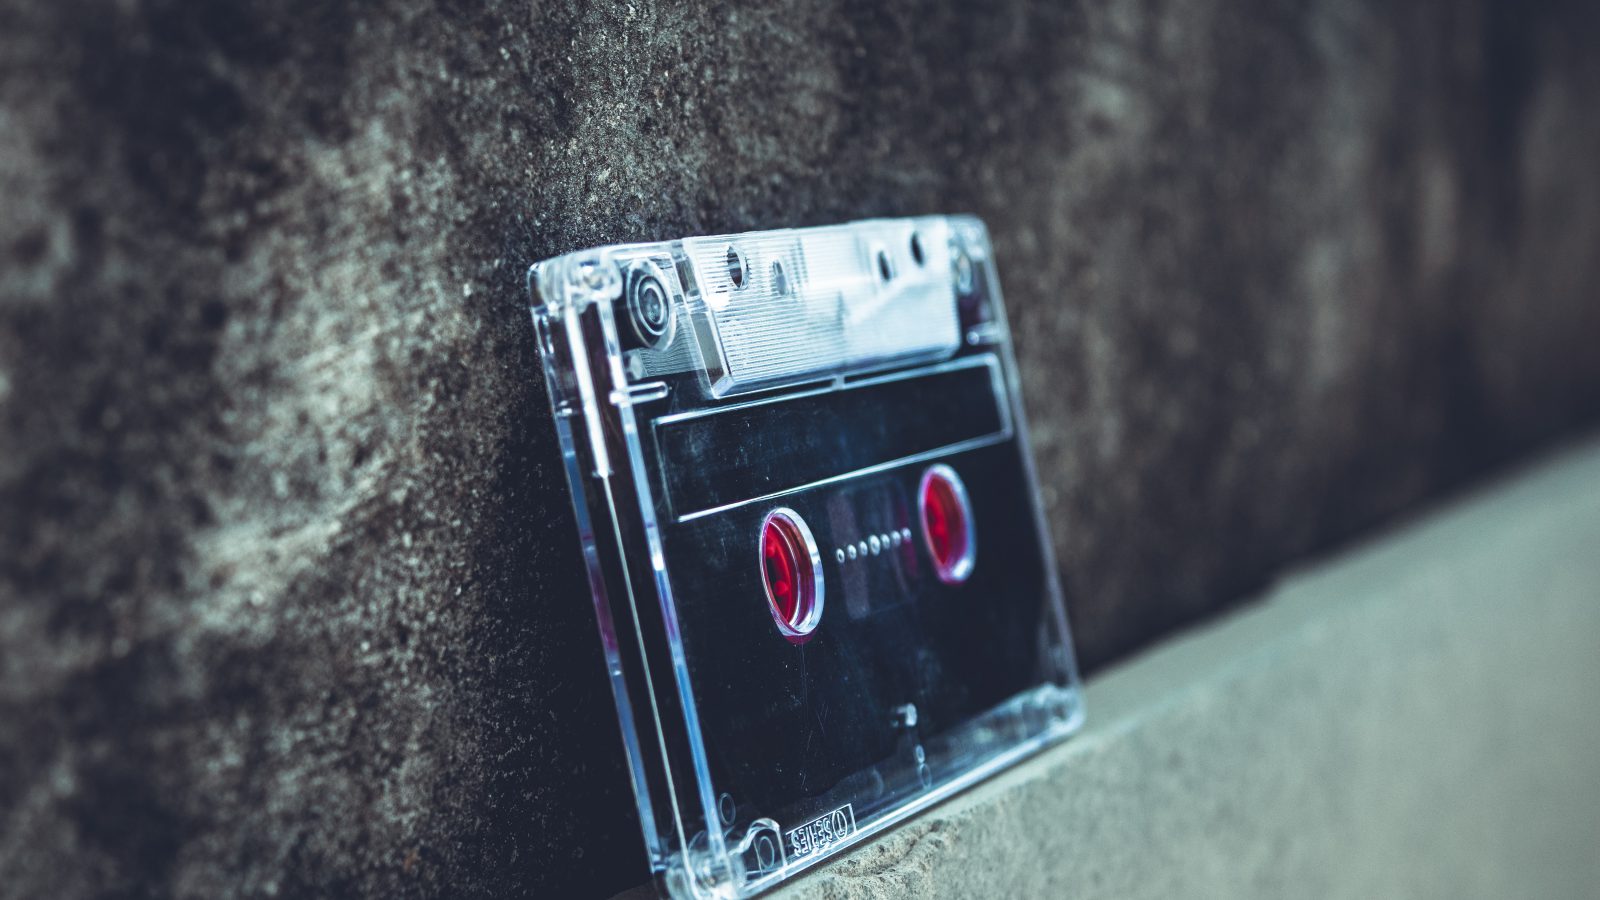 a clear audio cassette tape leaning upside down against a wall